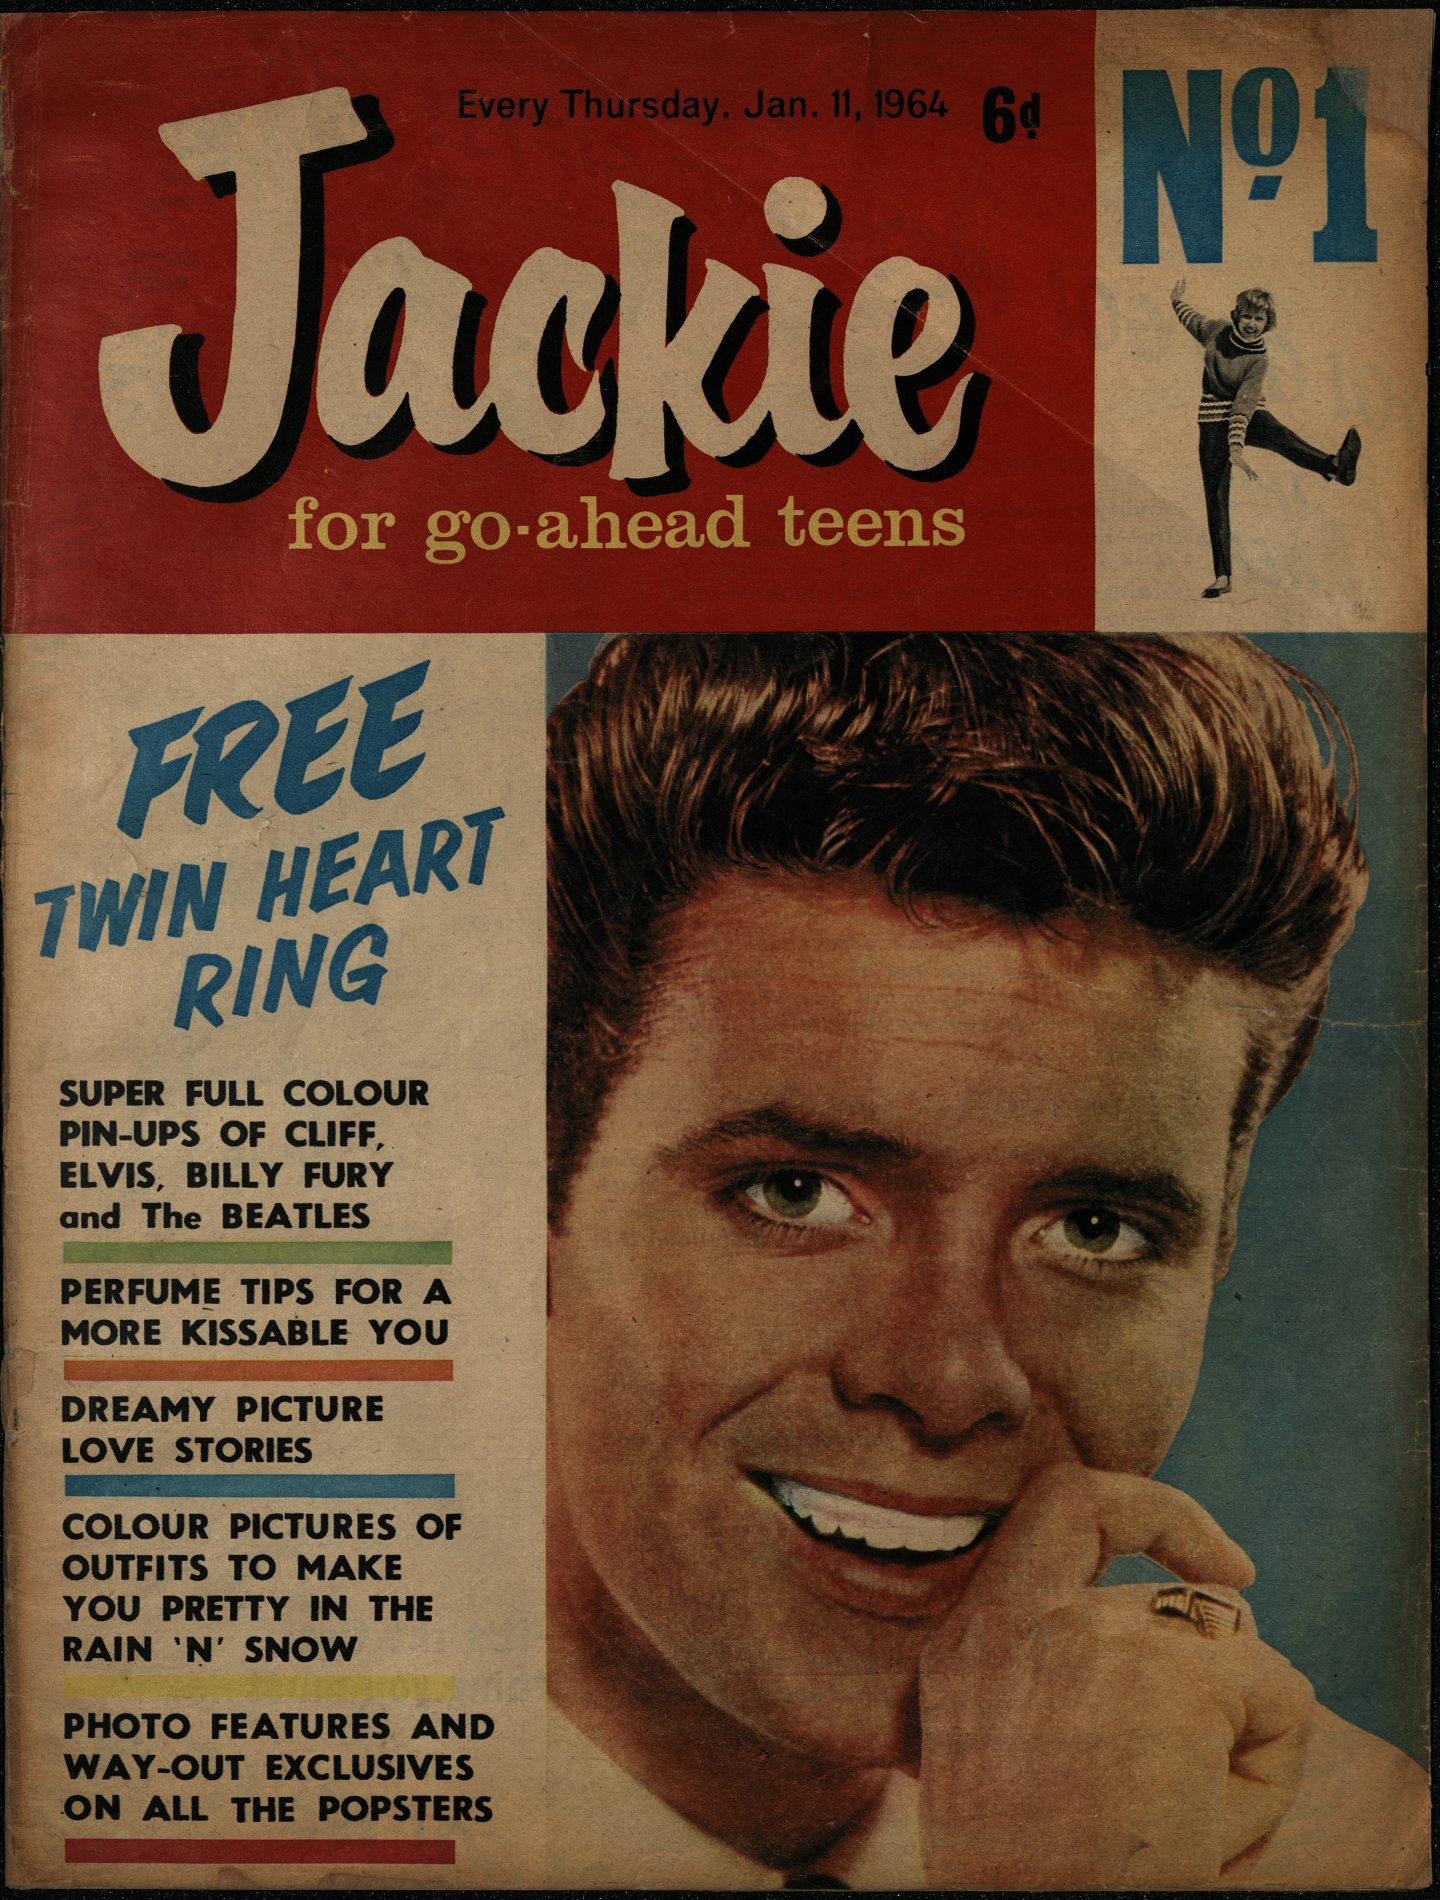 The first edition of the iconic teen magazine Jackie, which had Cliff Richard on the cover and came out on January 11 1964. 